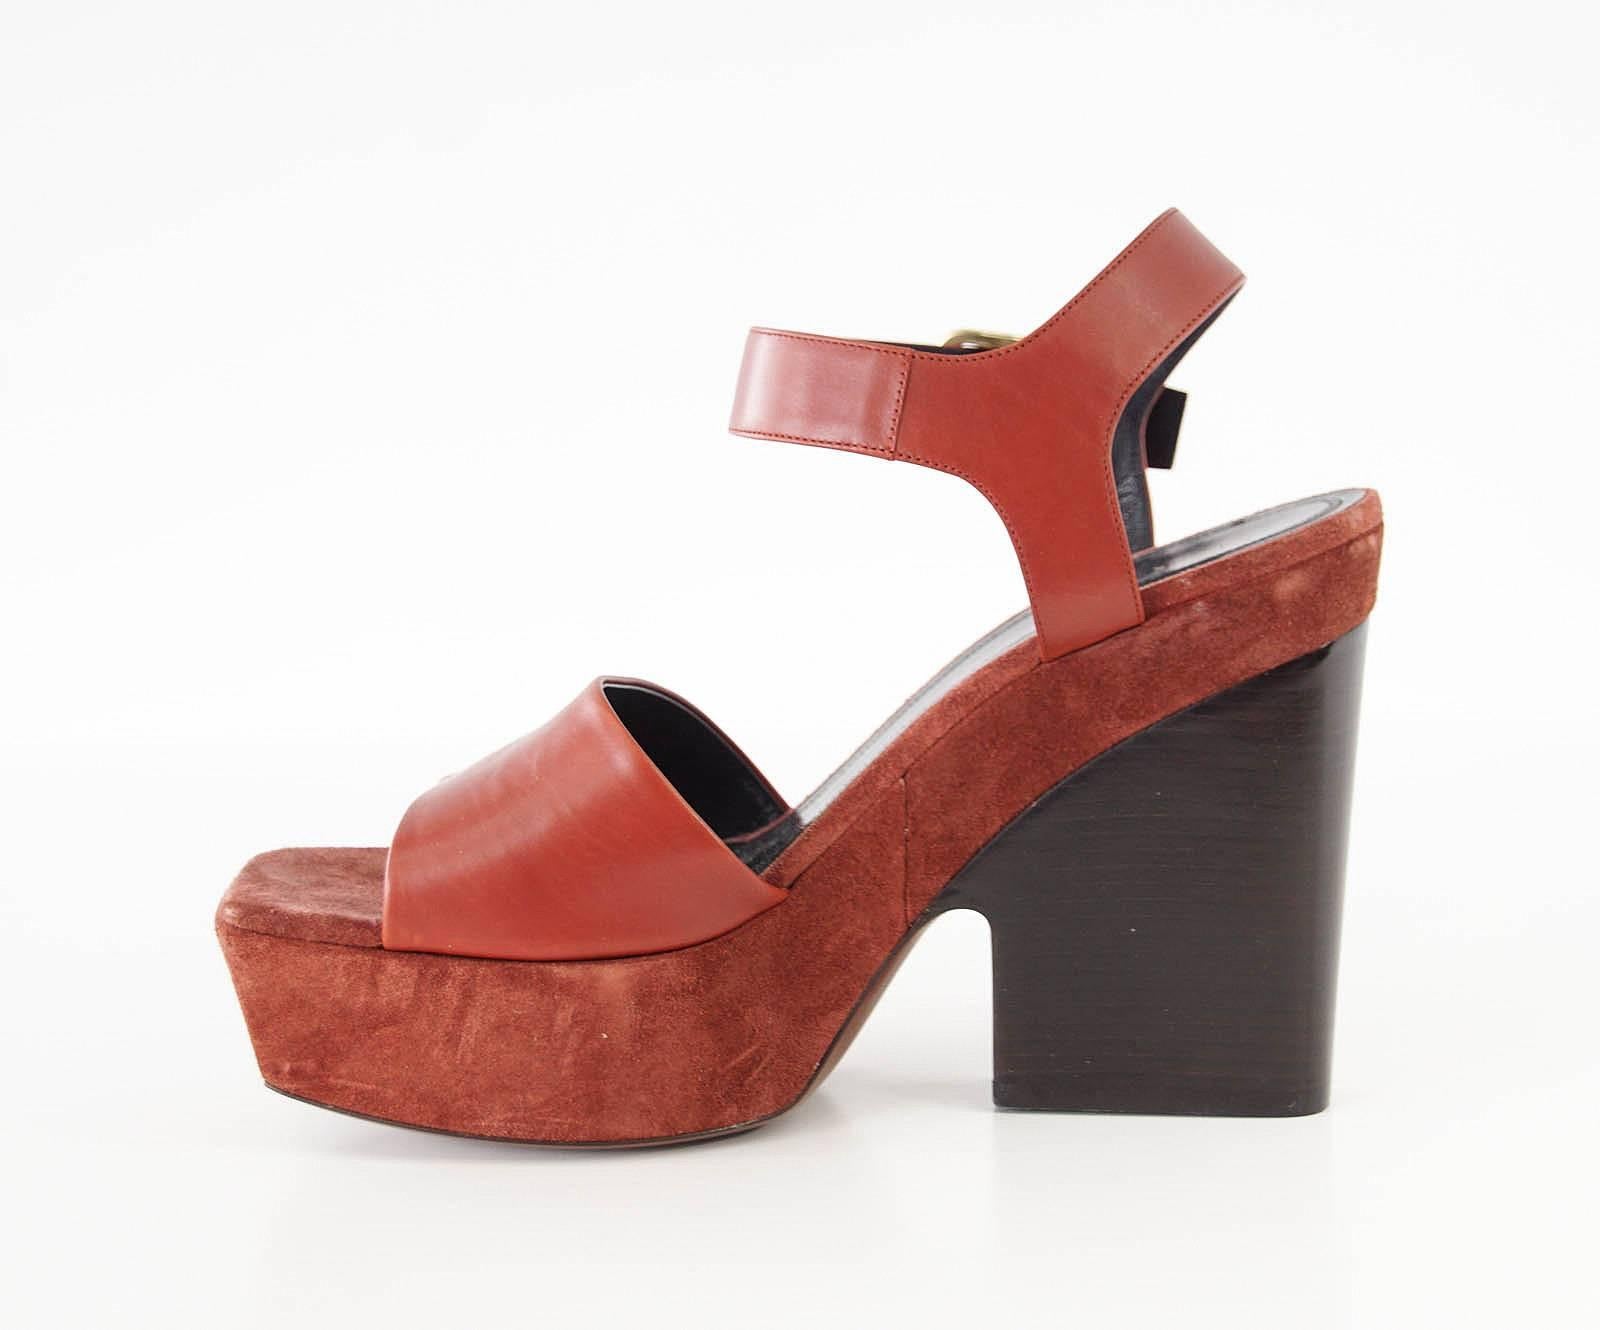  
Guaranteed authentic Celine leather and suede platform shoe. 
Open toe platform shoe in a rich rust with bold straps.
Platform is suede with leather straps.
Shaped wood stacked block heel.
Shoe has a light mark on strap across toes. 
NEW or NEVER